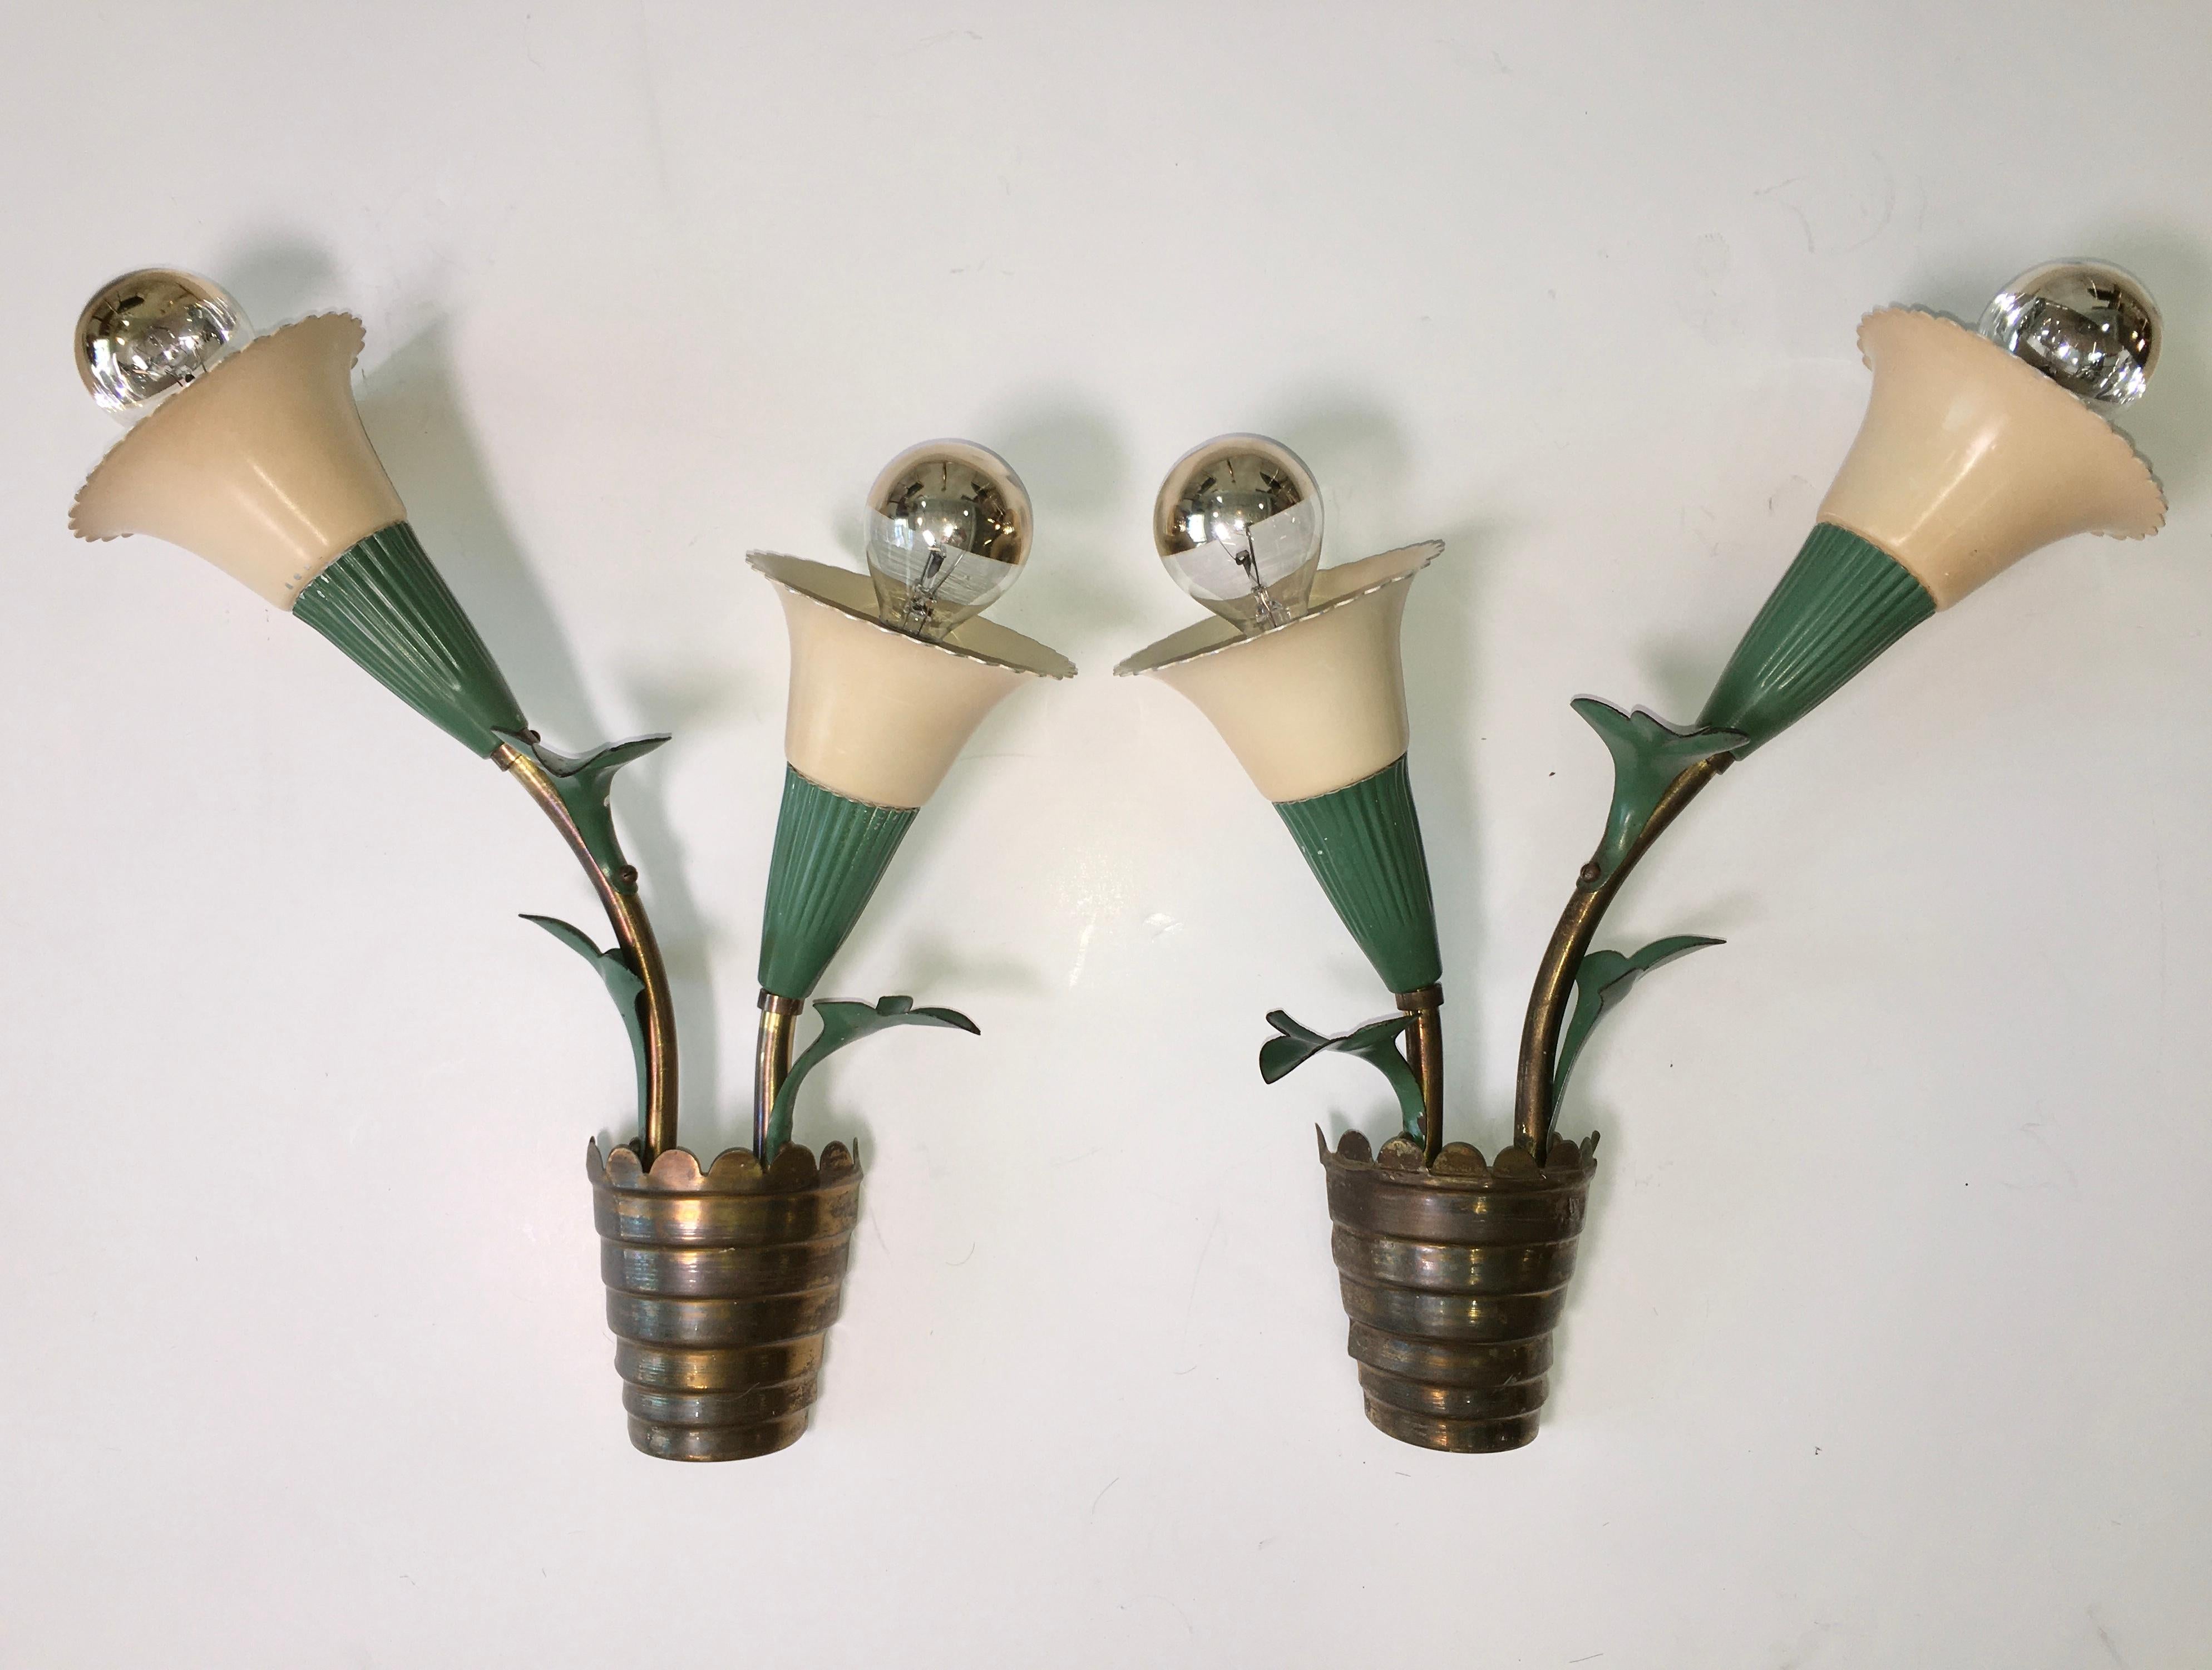 Pair of 1940s Italian double light wall sconces in the form of potted flowers (lilies?). Most unusual. Bench made in an artisanal lighting workshop. Sheet brass ziggurat stepped tapered pots with scalloped edges. Brass tubing surmounted by enameled